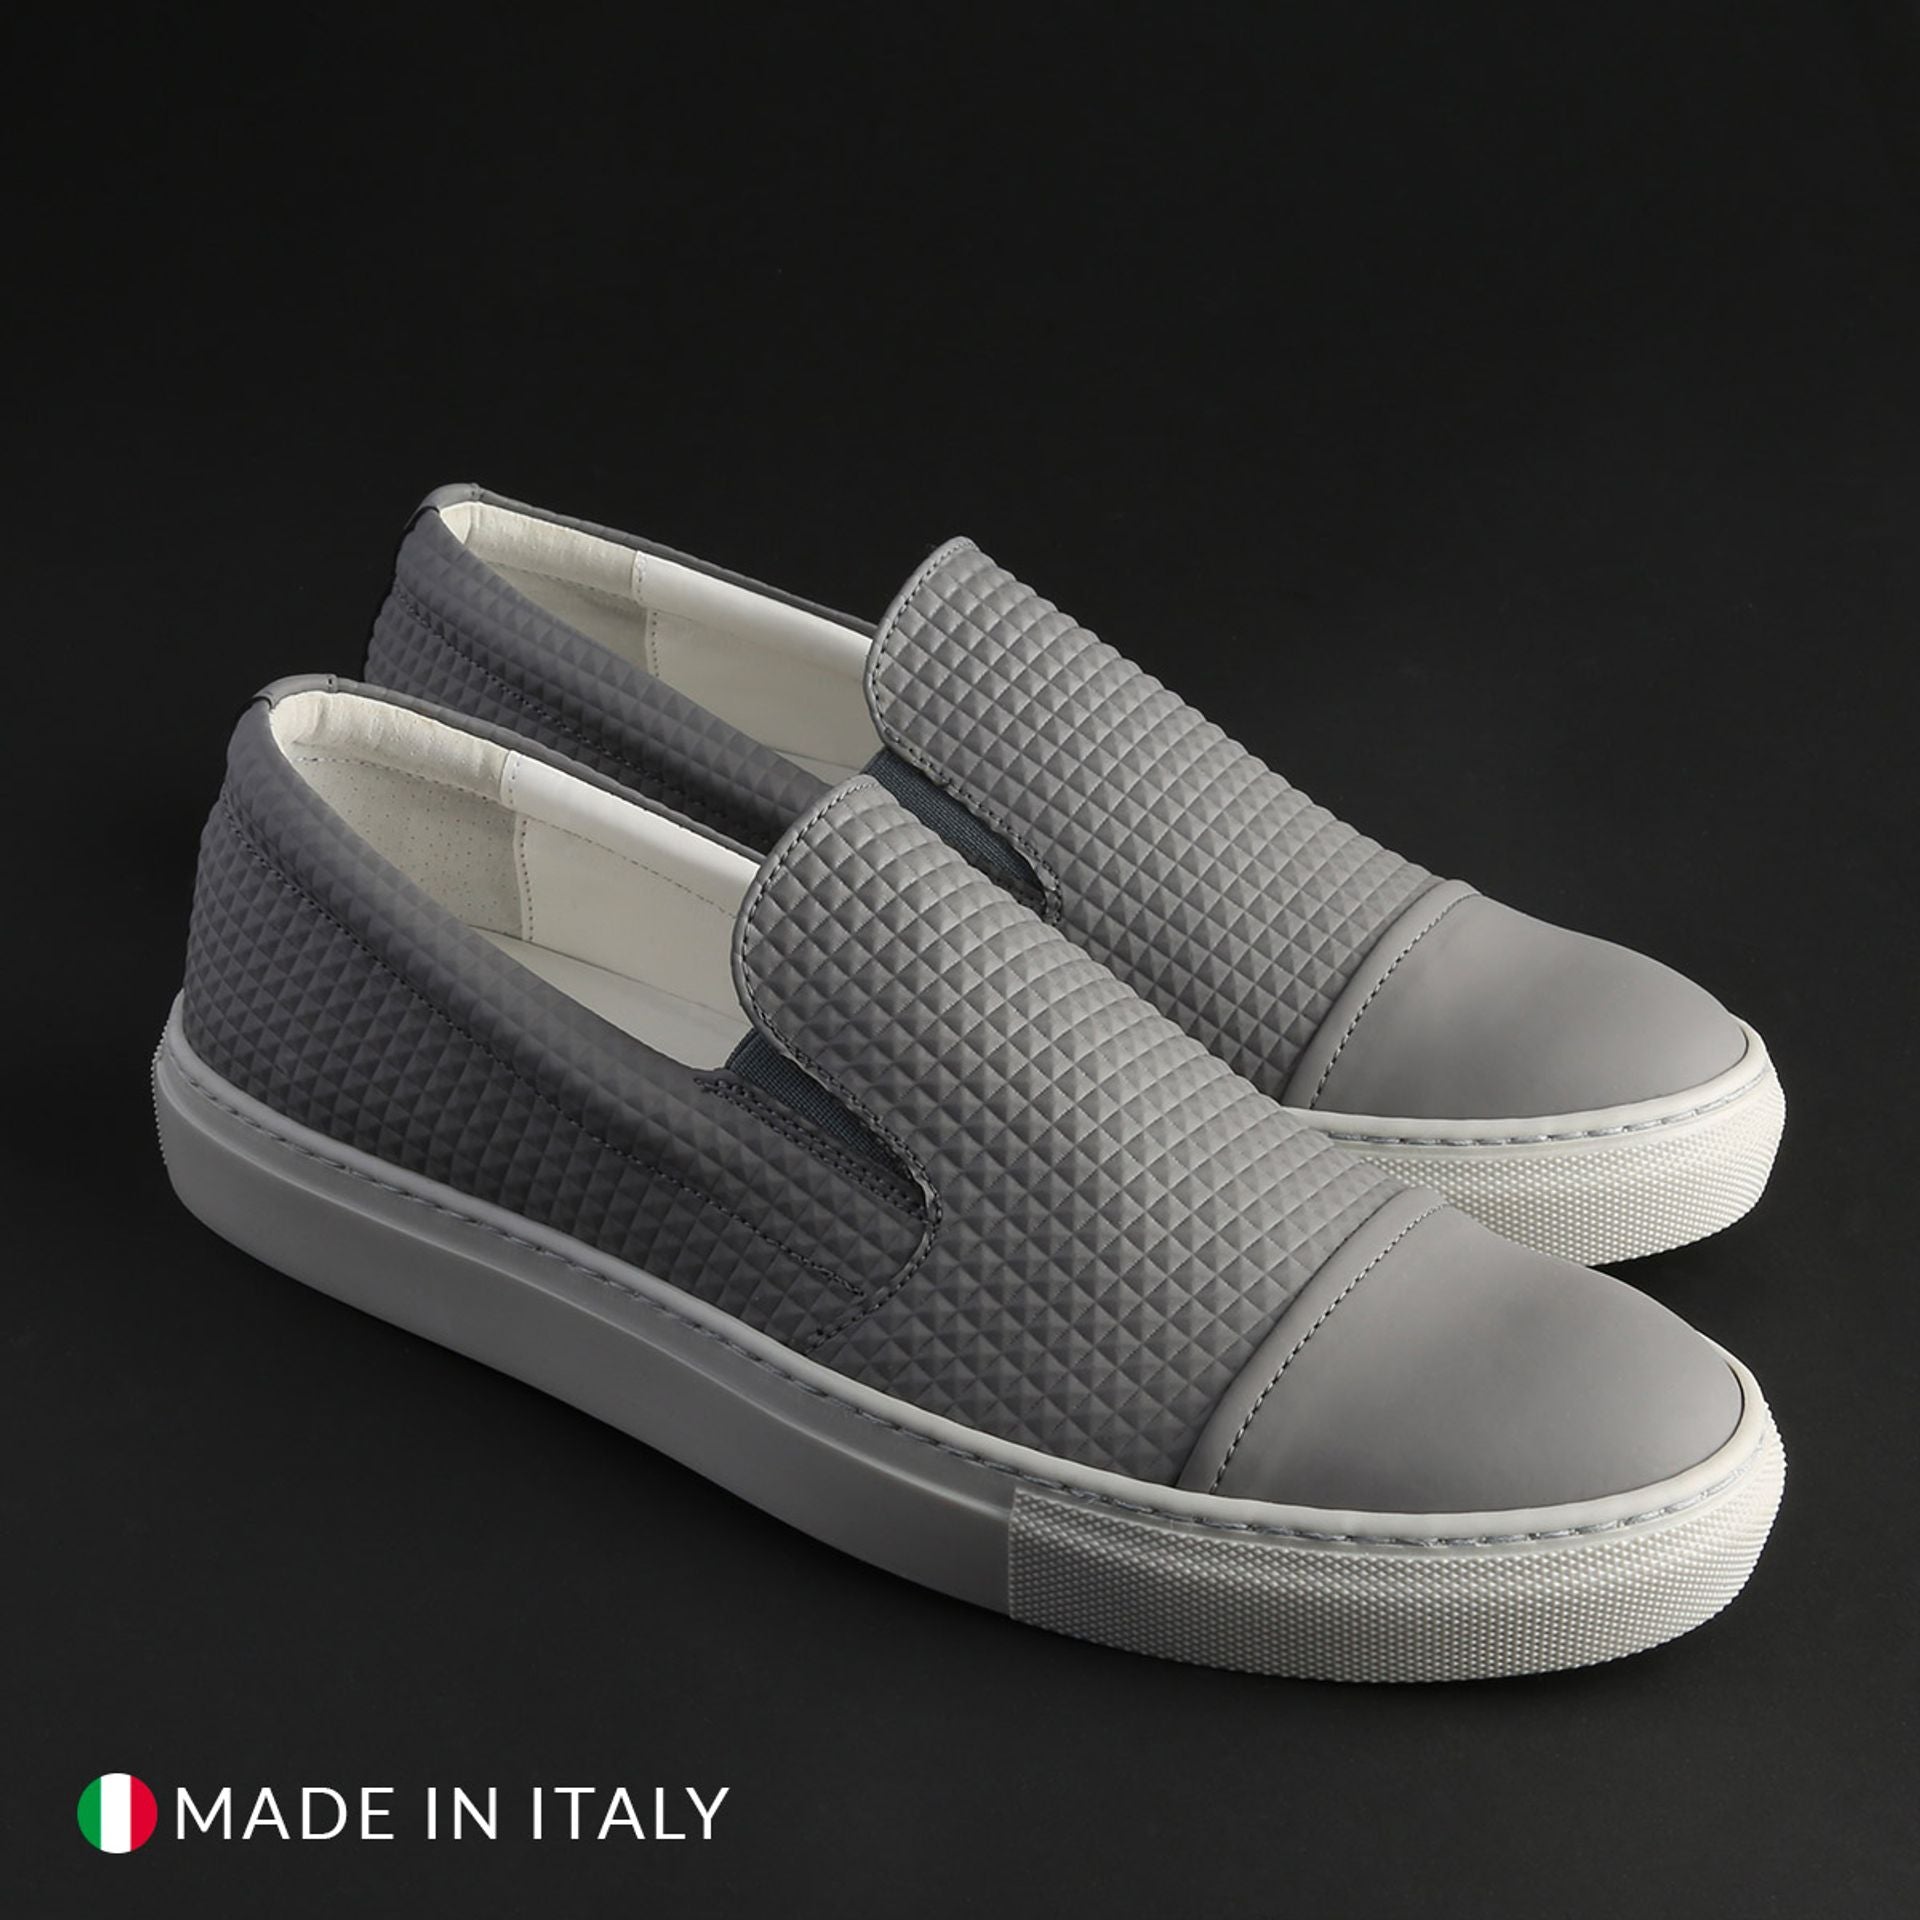 Made in Italia Slippers